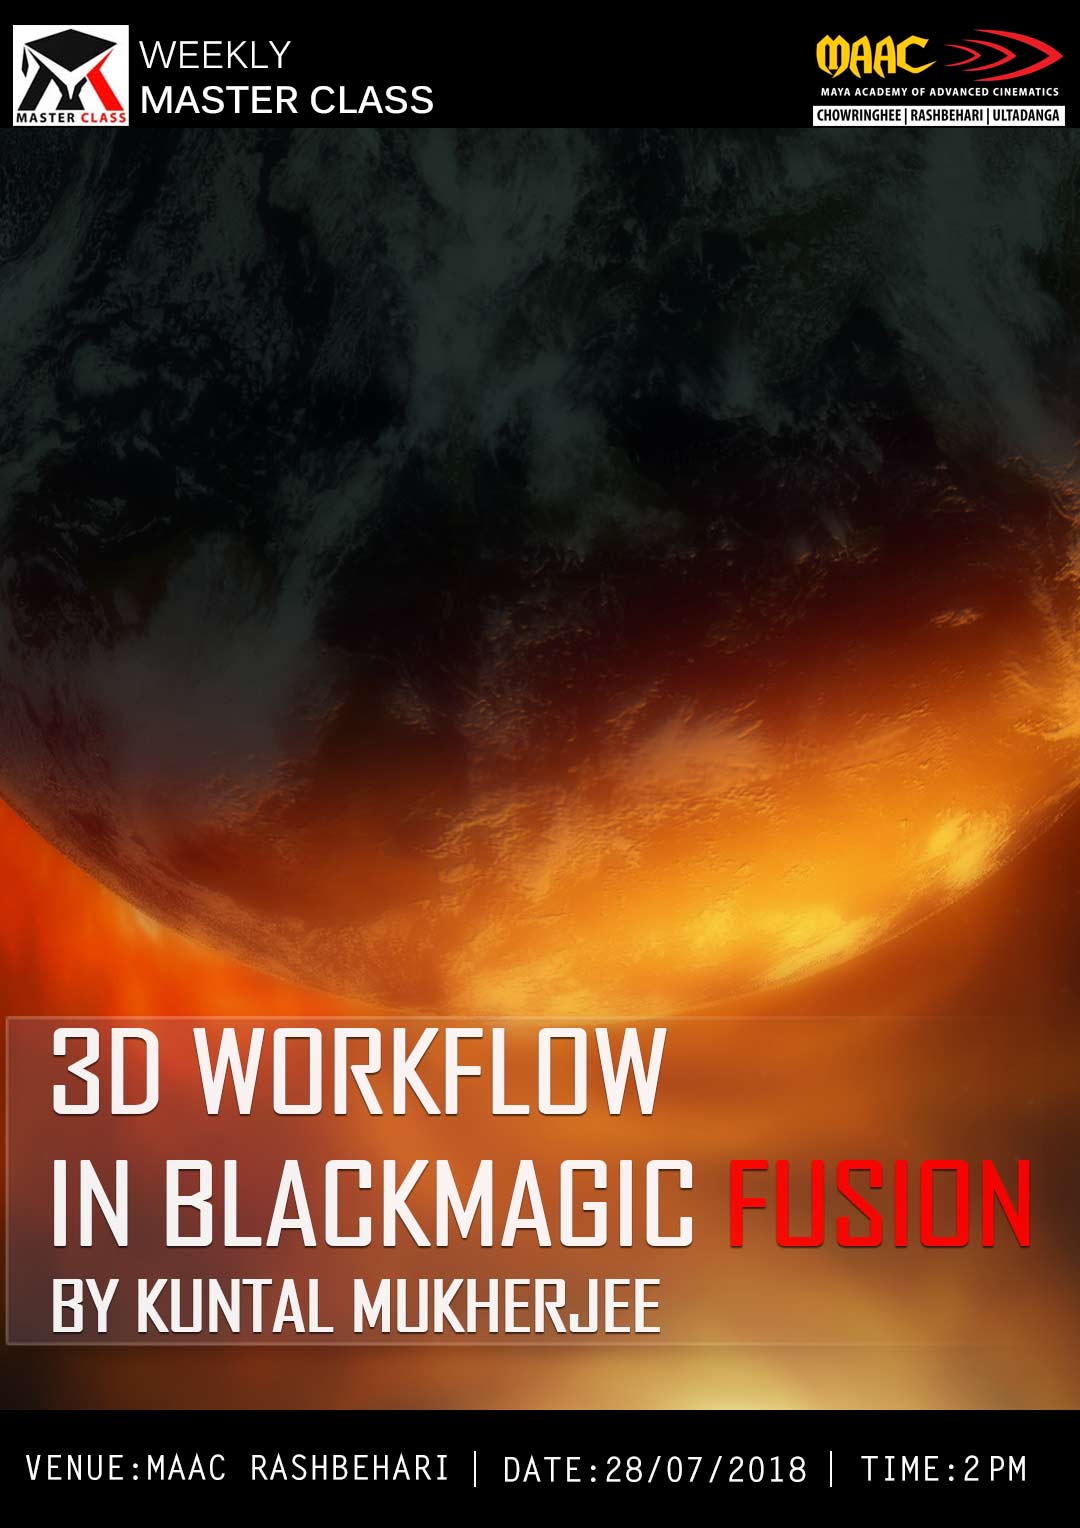 Weekly Master Class on 3D Workflow in Blackmagic Fusion